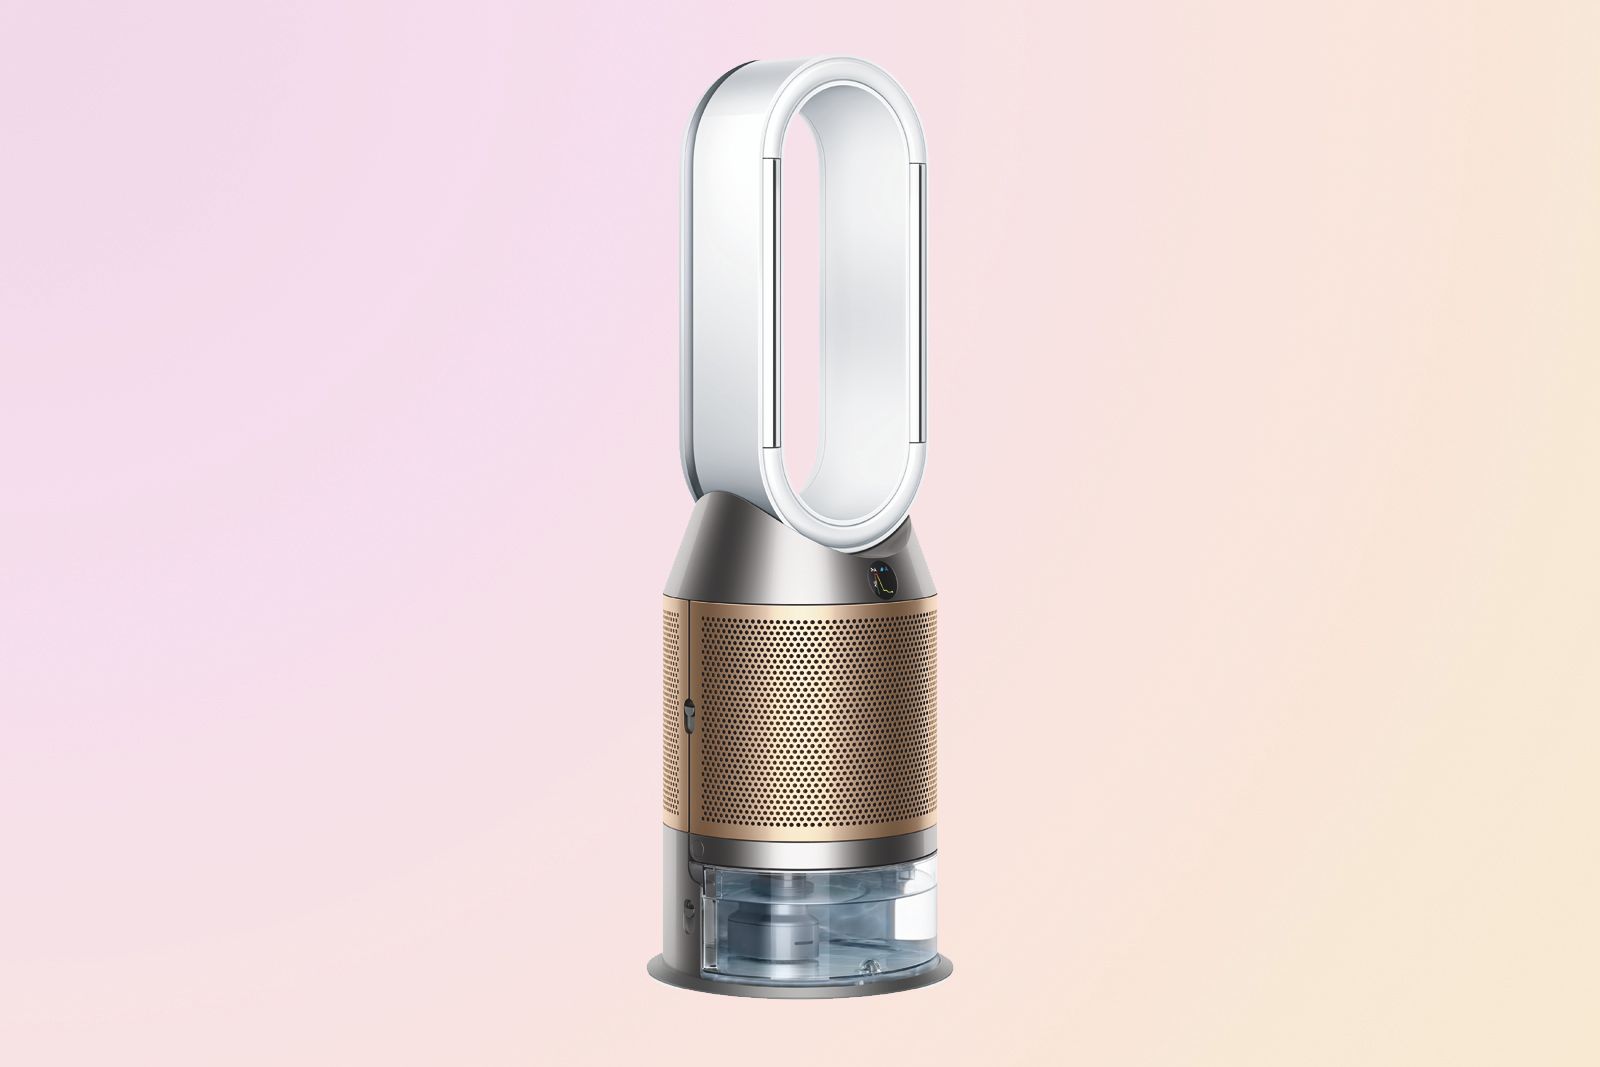 Dyson Purifier Humidify+Cool Formaldehyde is its first purifying humidifying fan for a healthier home